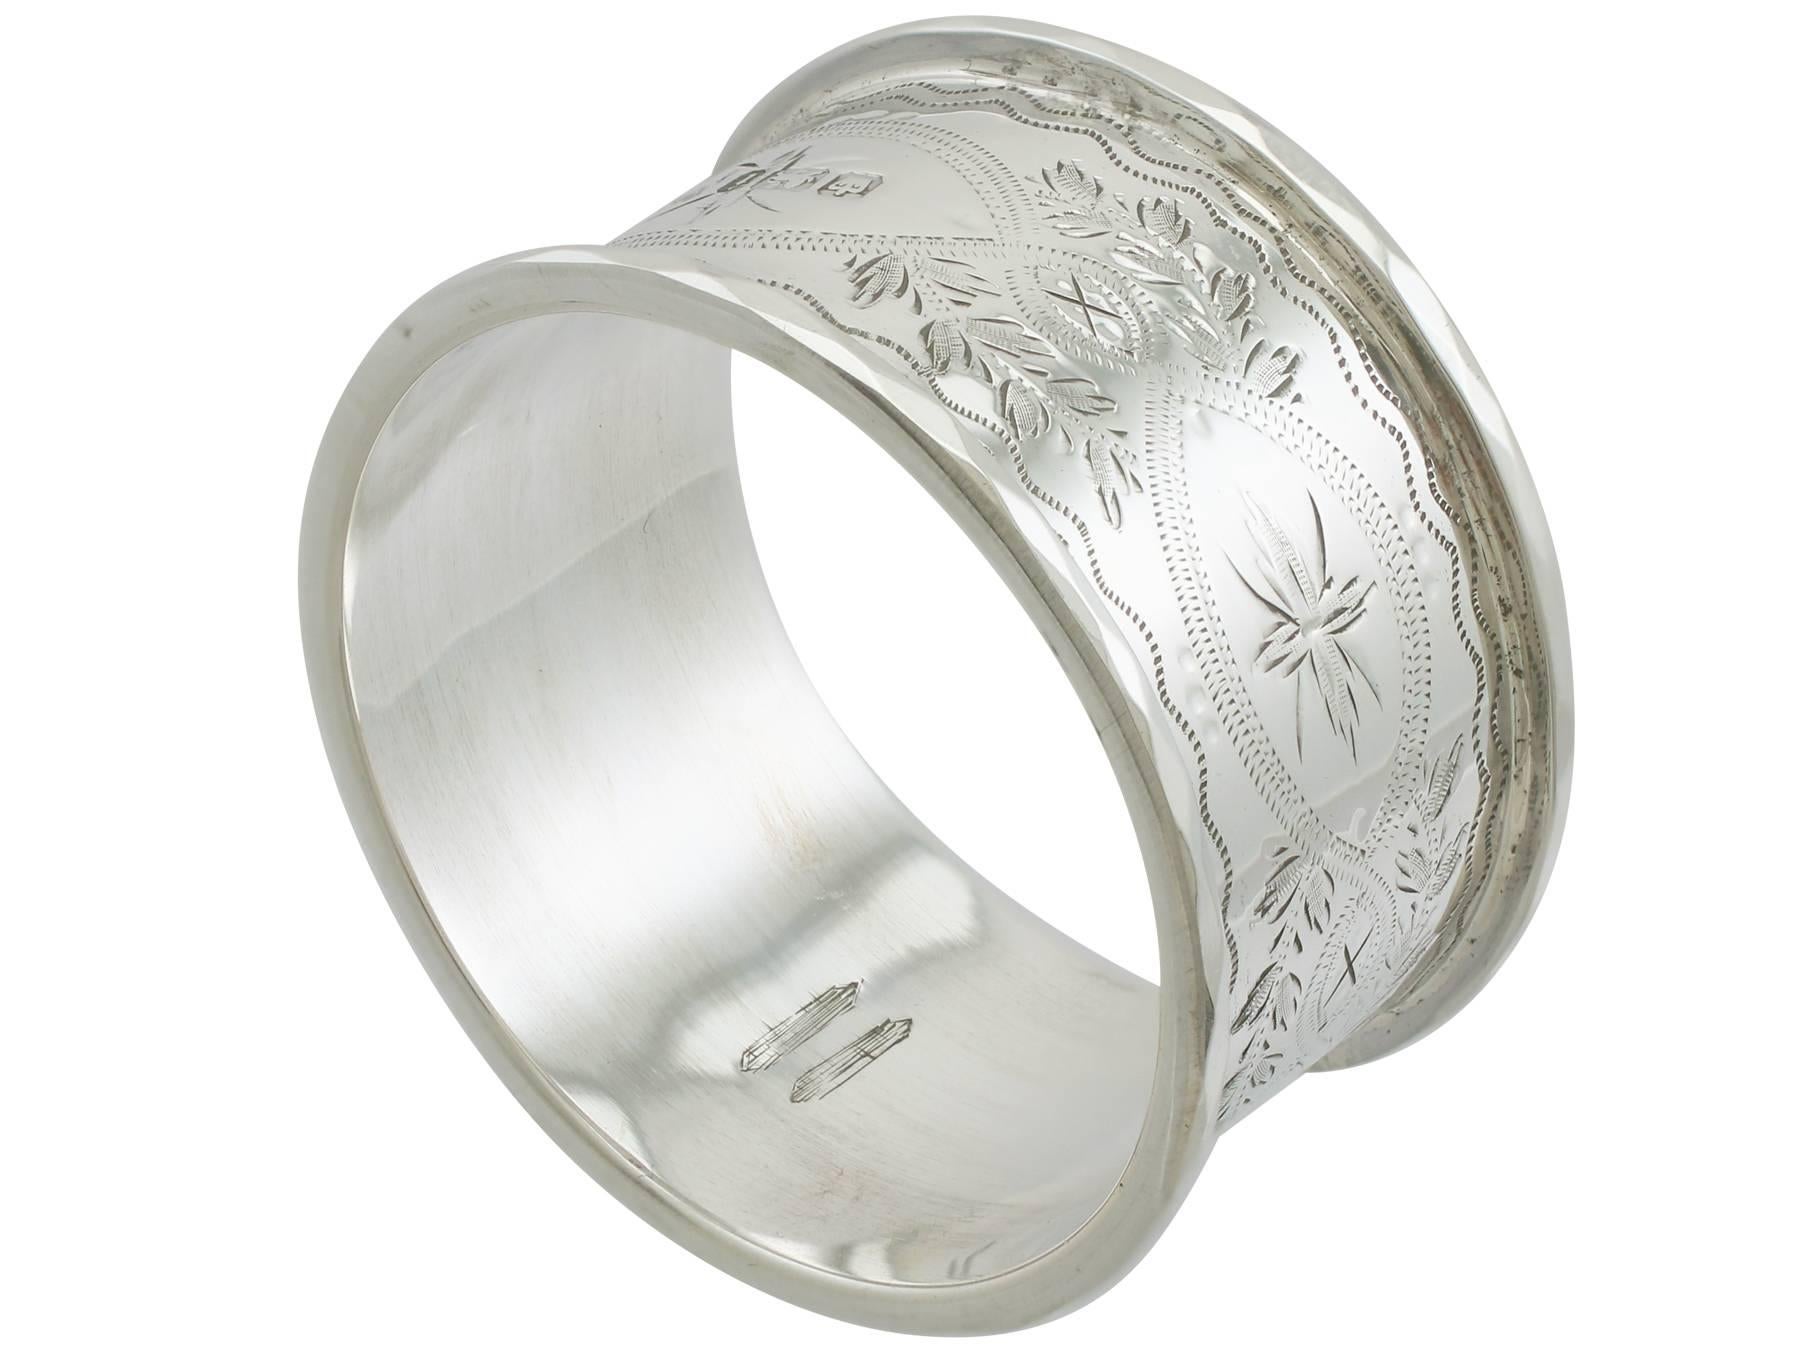 Edwardian Sterling Silver Napkin Rings by Walker and Hall at 1stDibs